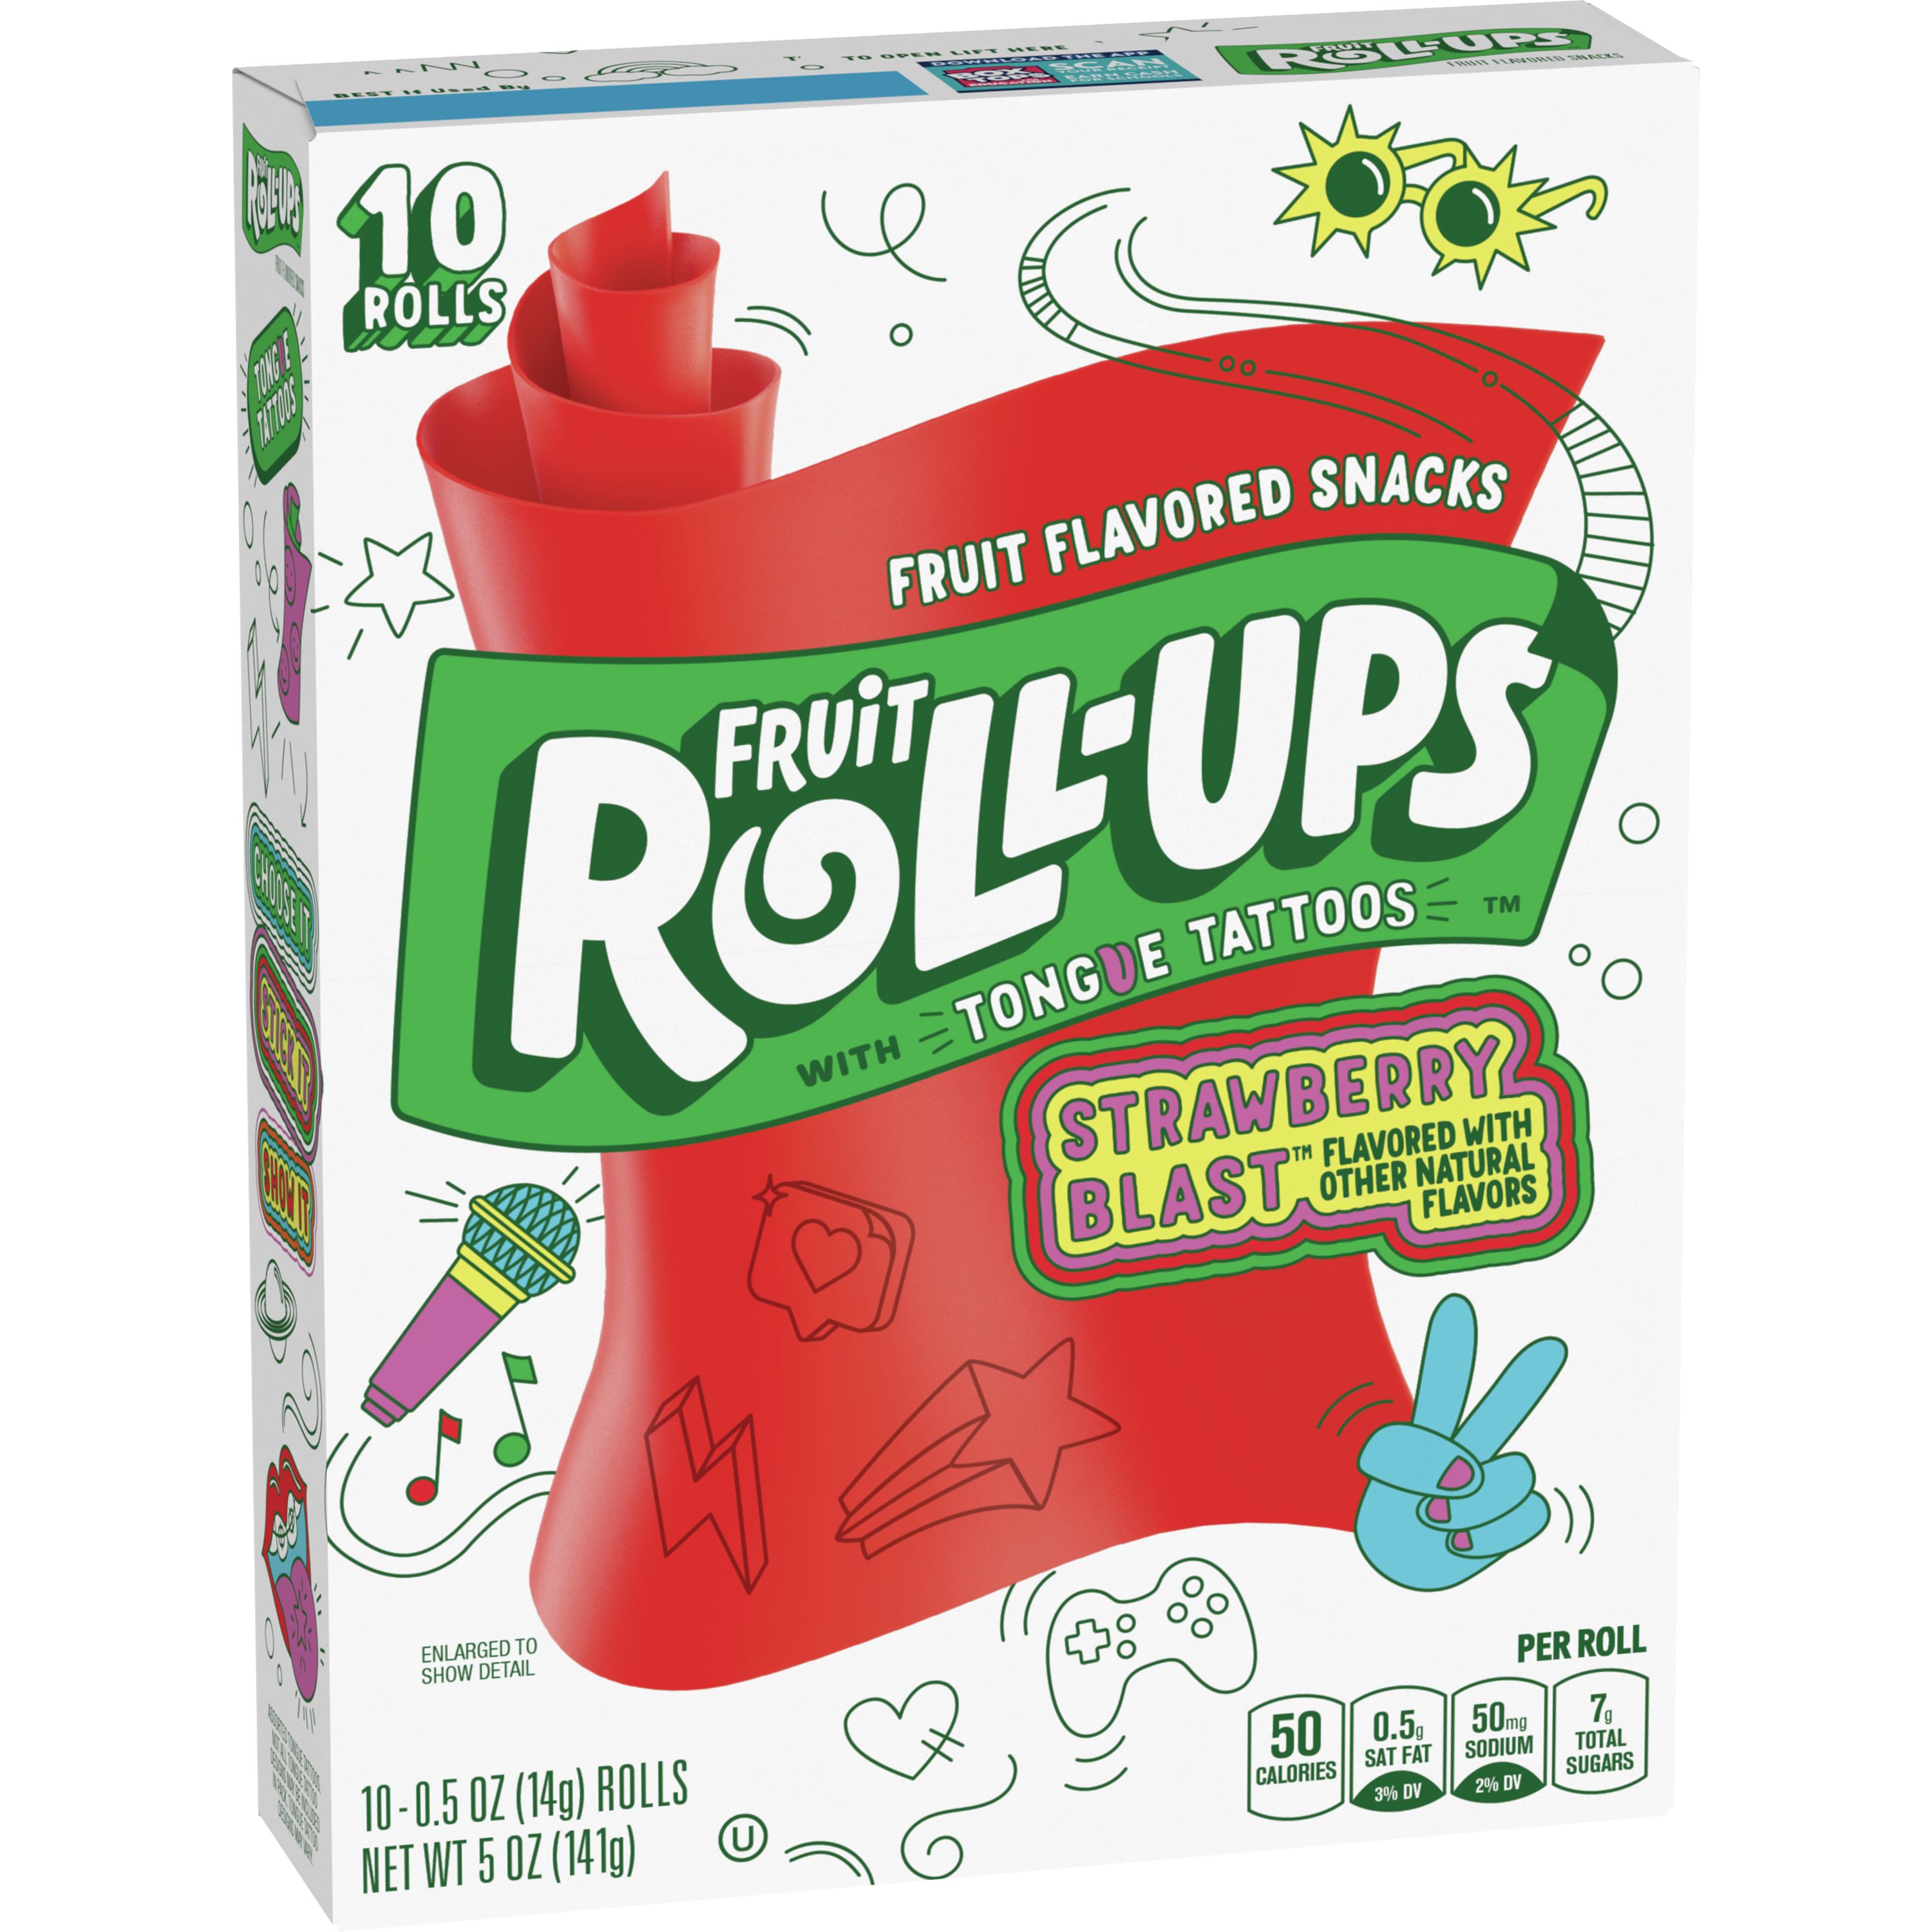 Fruit RollUps Space Jam Tongue Tattoo Limited Edition 10 Pack 141g   United Sweets